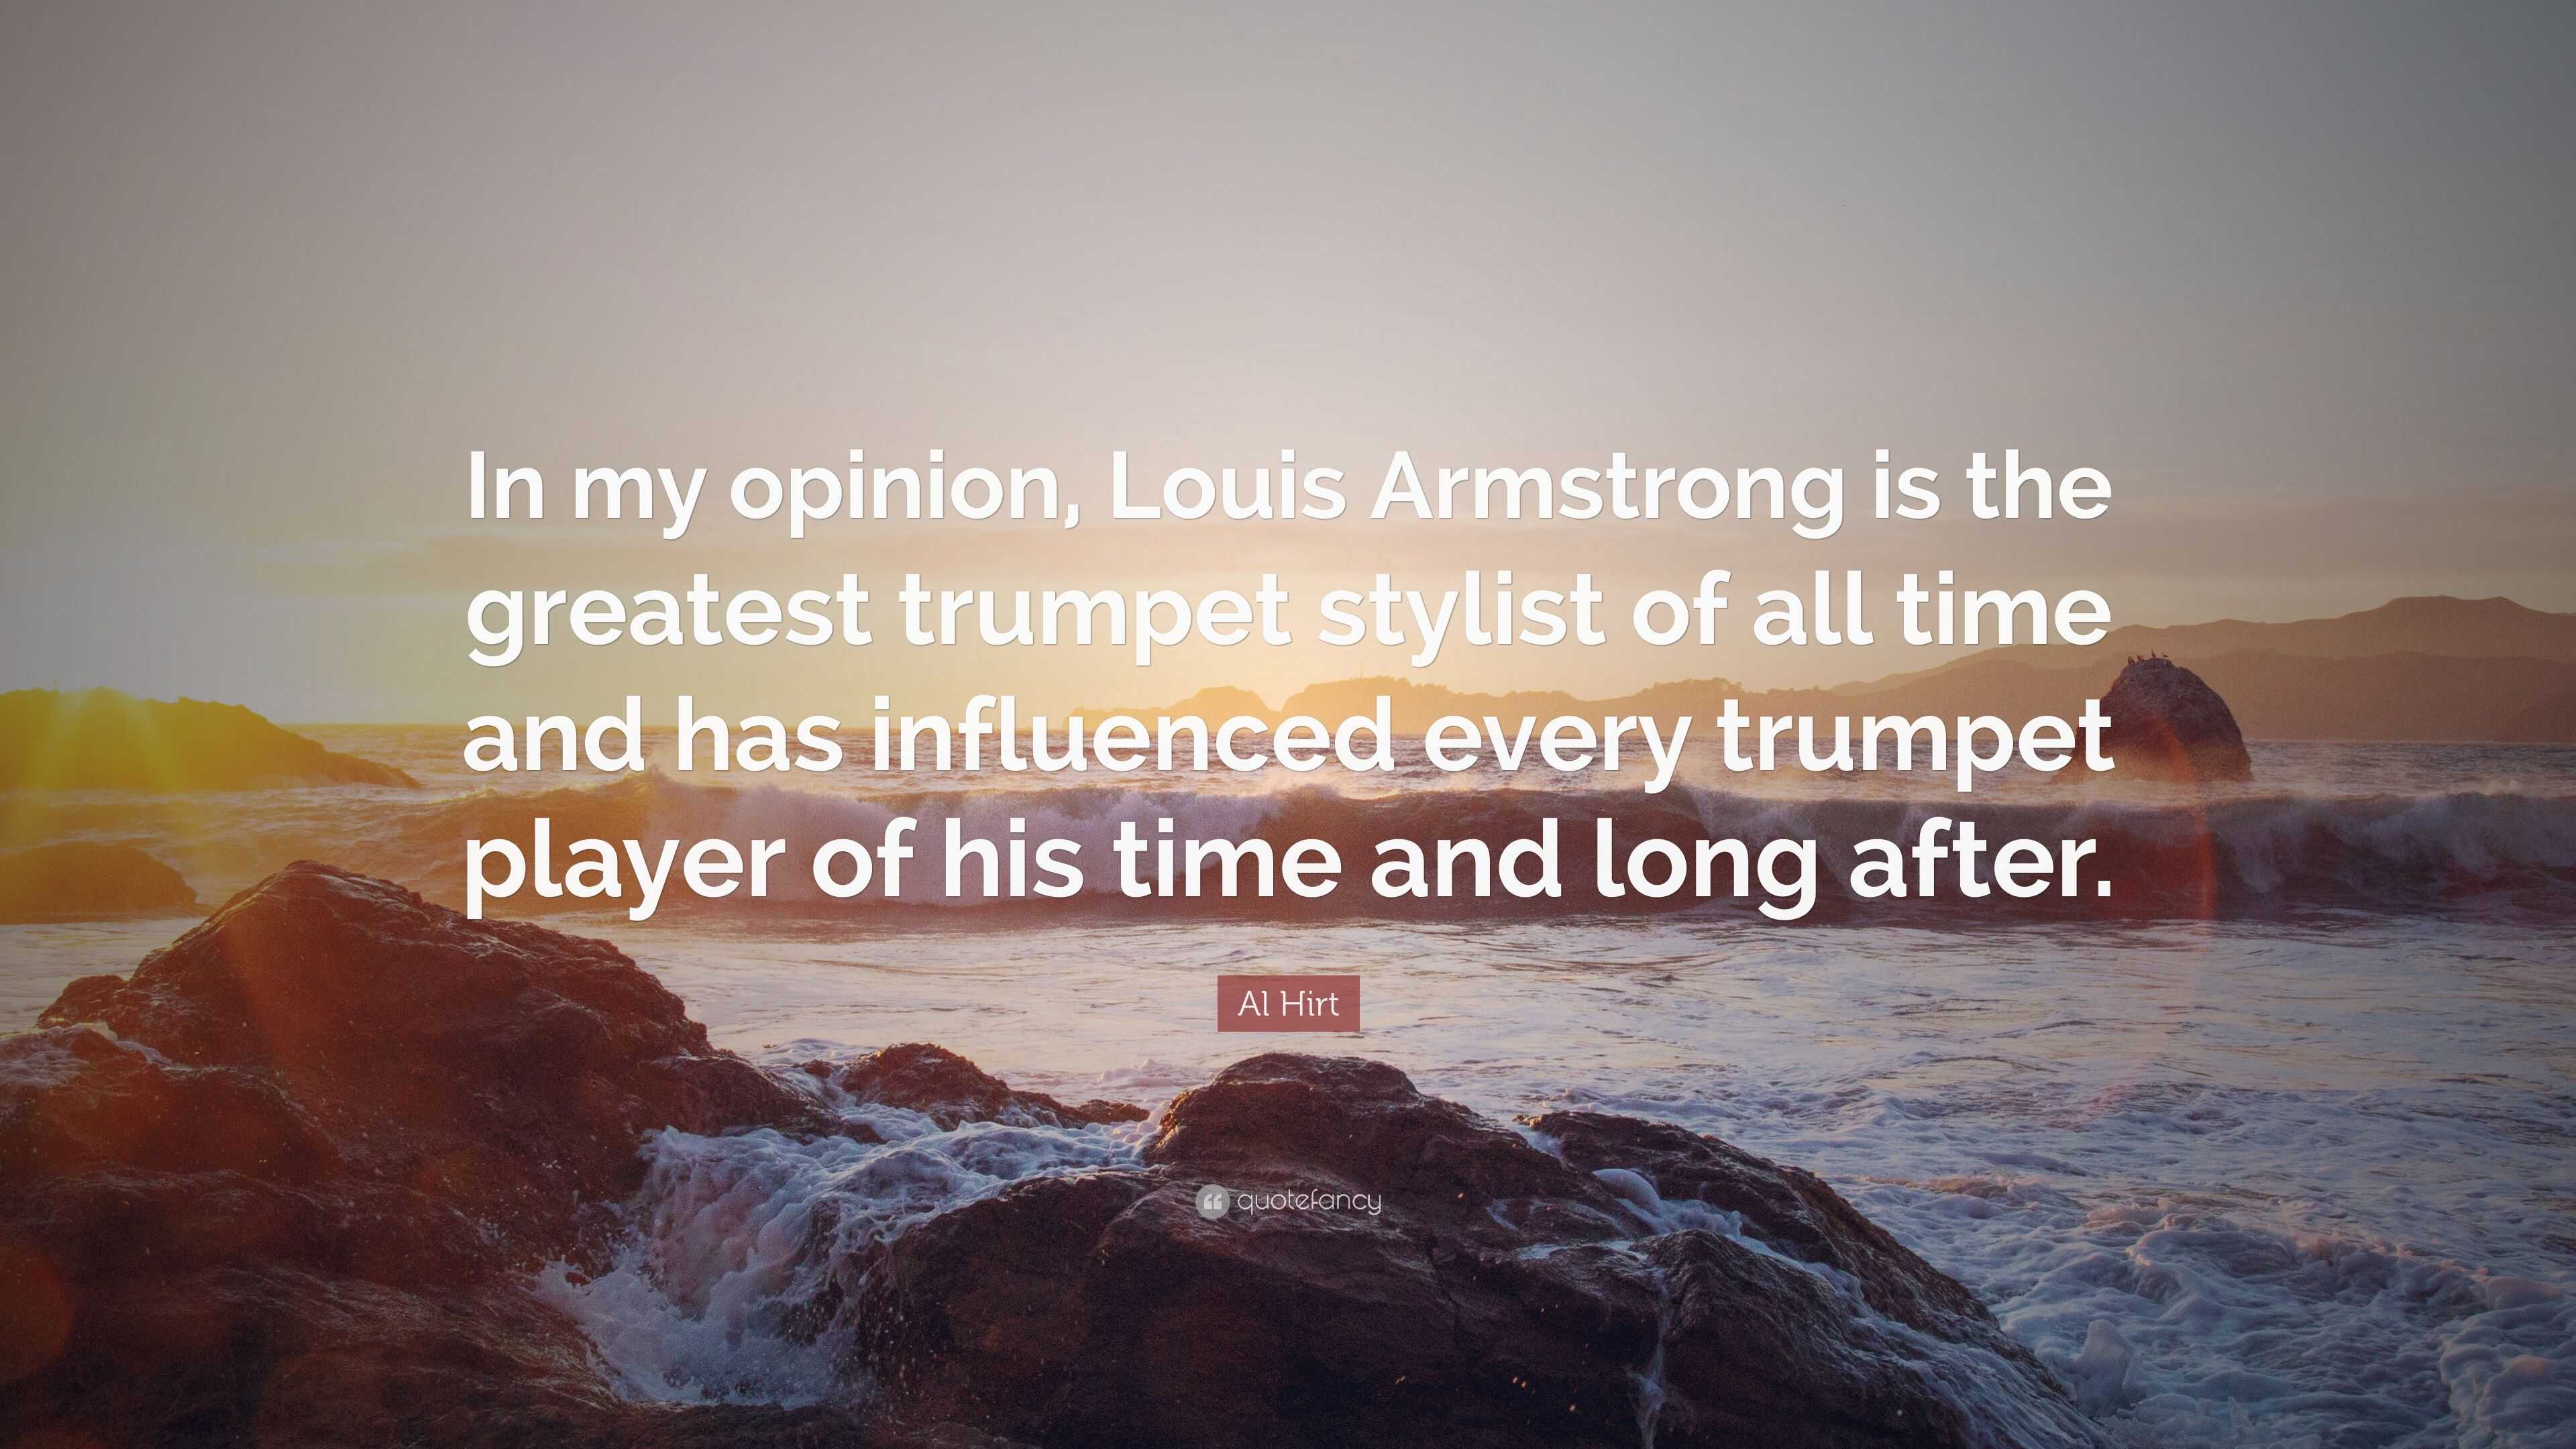 Al Hirt Quote: “In my opinion, Louis Armstrong is the greatest trumpet ...